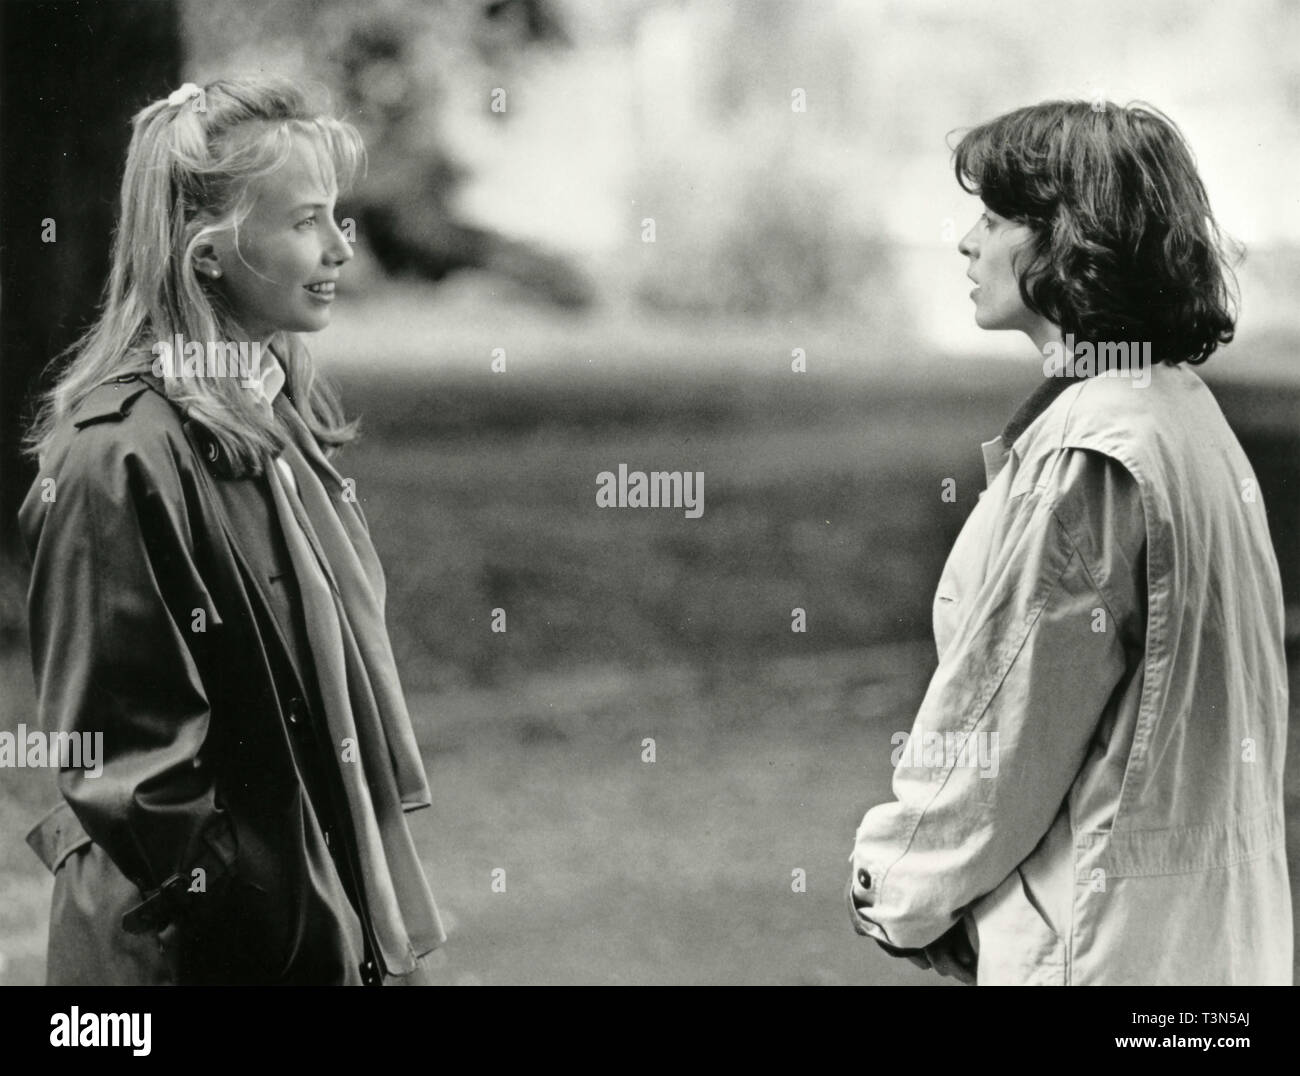 Actresses Rebecca De Mornay and Annabella Sciorra in the movie The Hand That Rocks The Cradle, 1990s Stock Photo